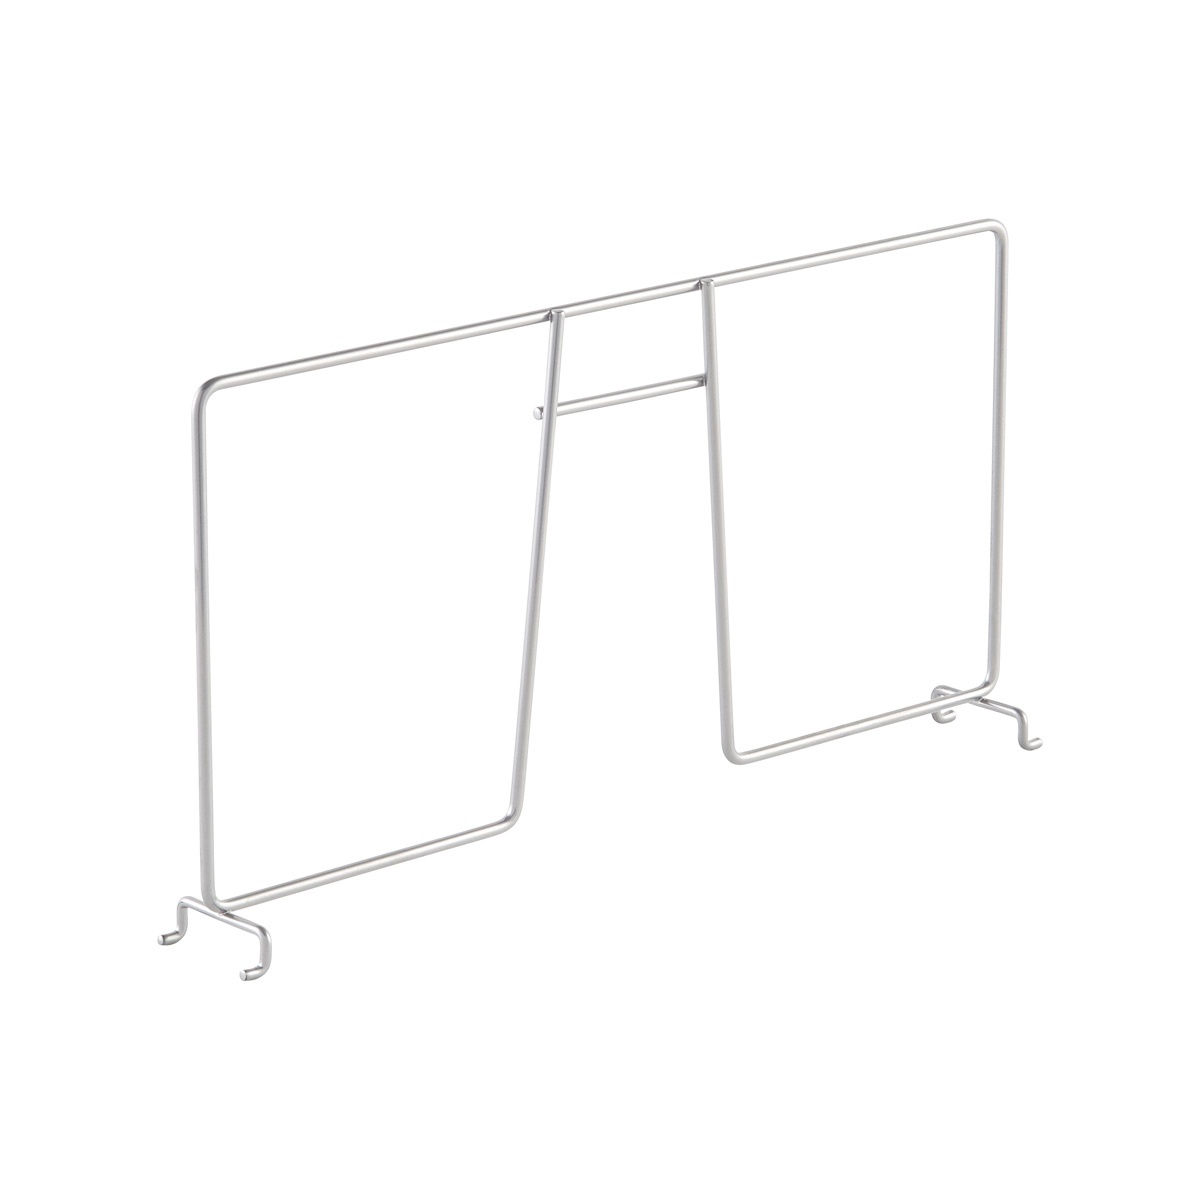 https://www.containerstore.com/catalogimages/306628/10013425-elfa-16in-Ventilated-Shelf-.jpg